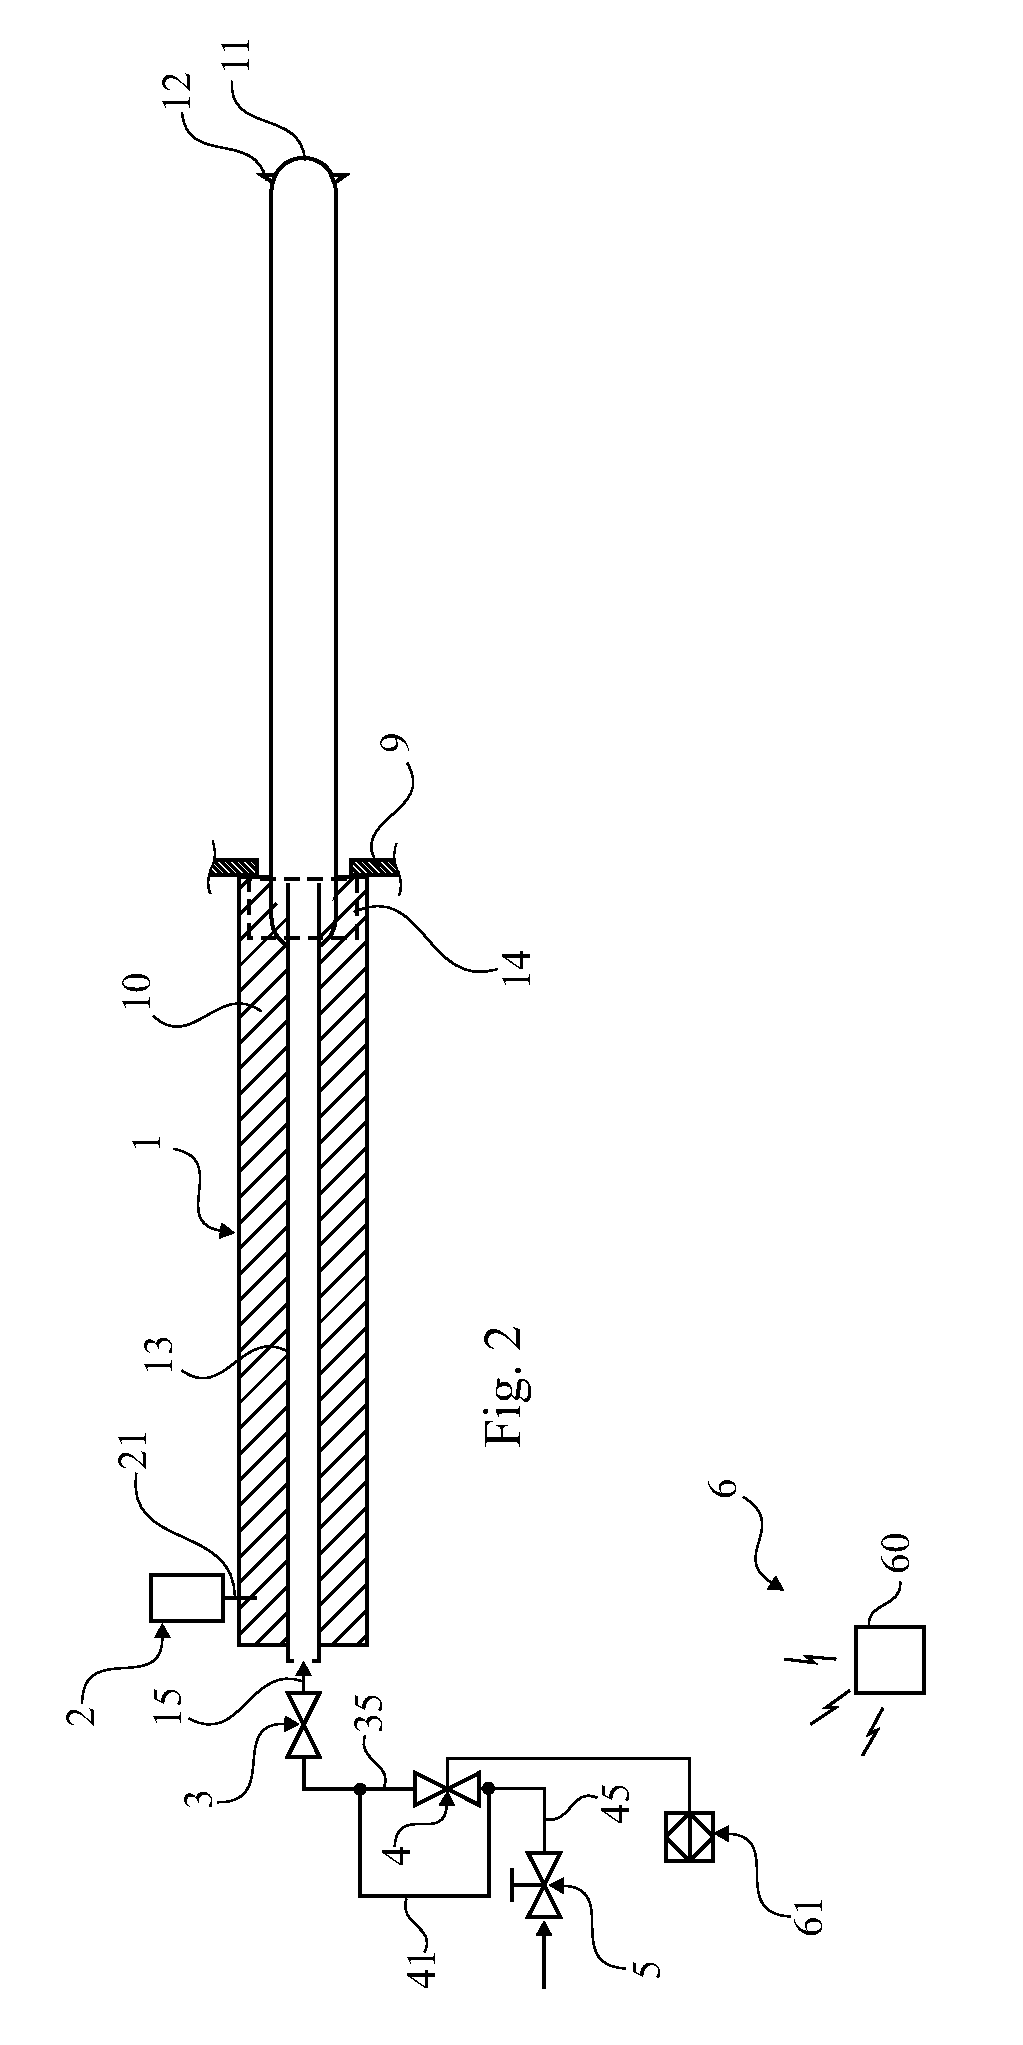 Method of rebuilding a sootblowing system of a recovery furnace, a sootblower for a recovery furnace, and a sootblowing system including a plurality of sootblowers